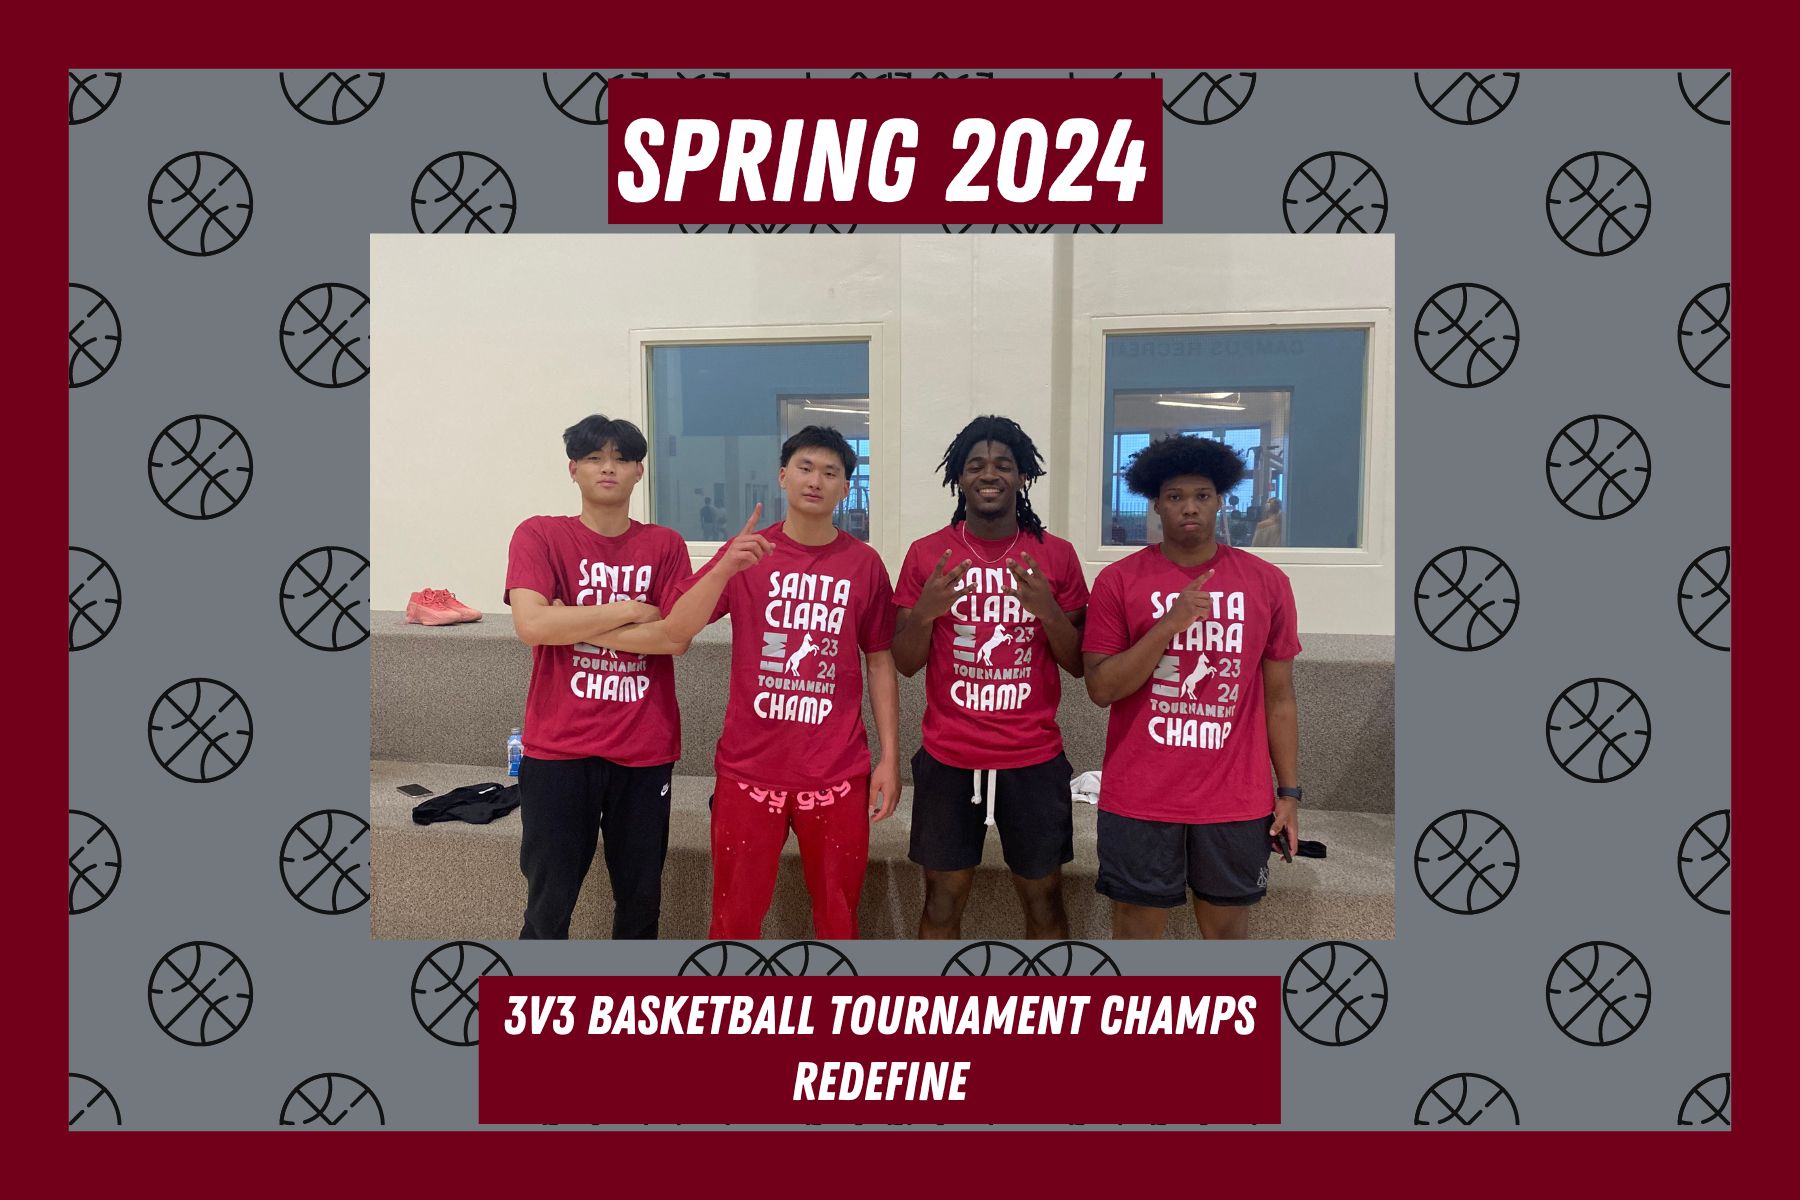 Photo of 3v3 Basketball Tournament champs, Redefine, posing in the Malley Center with their tournament champion shirts.